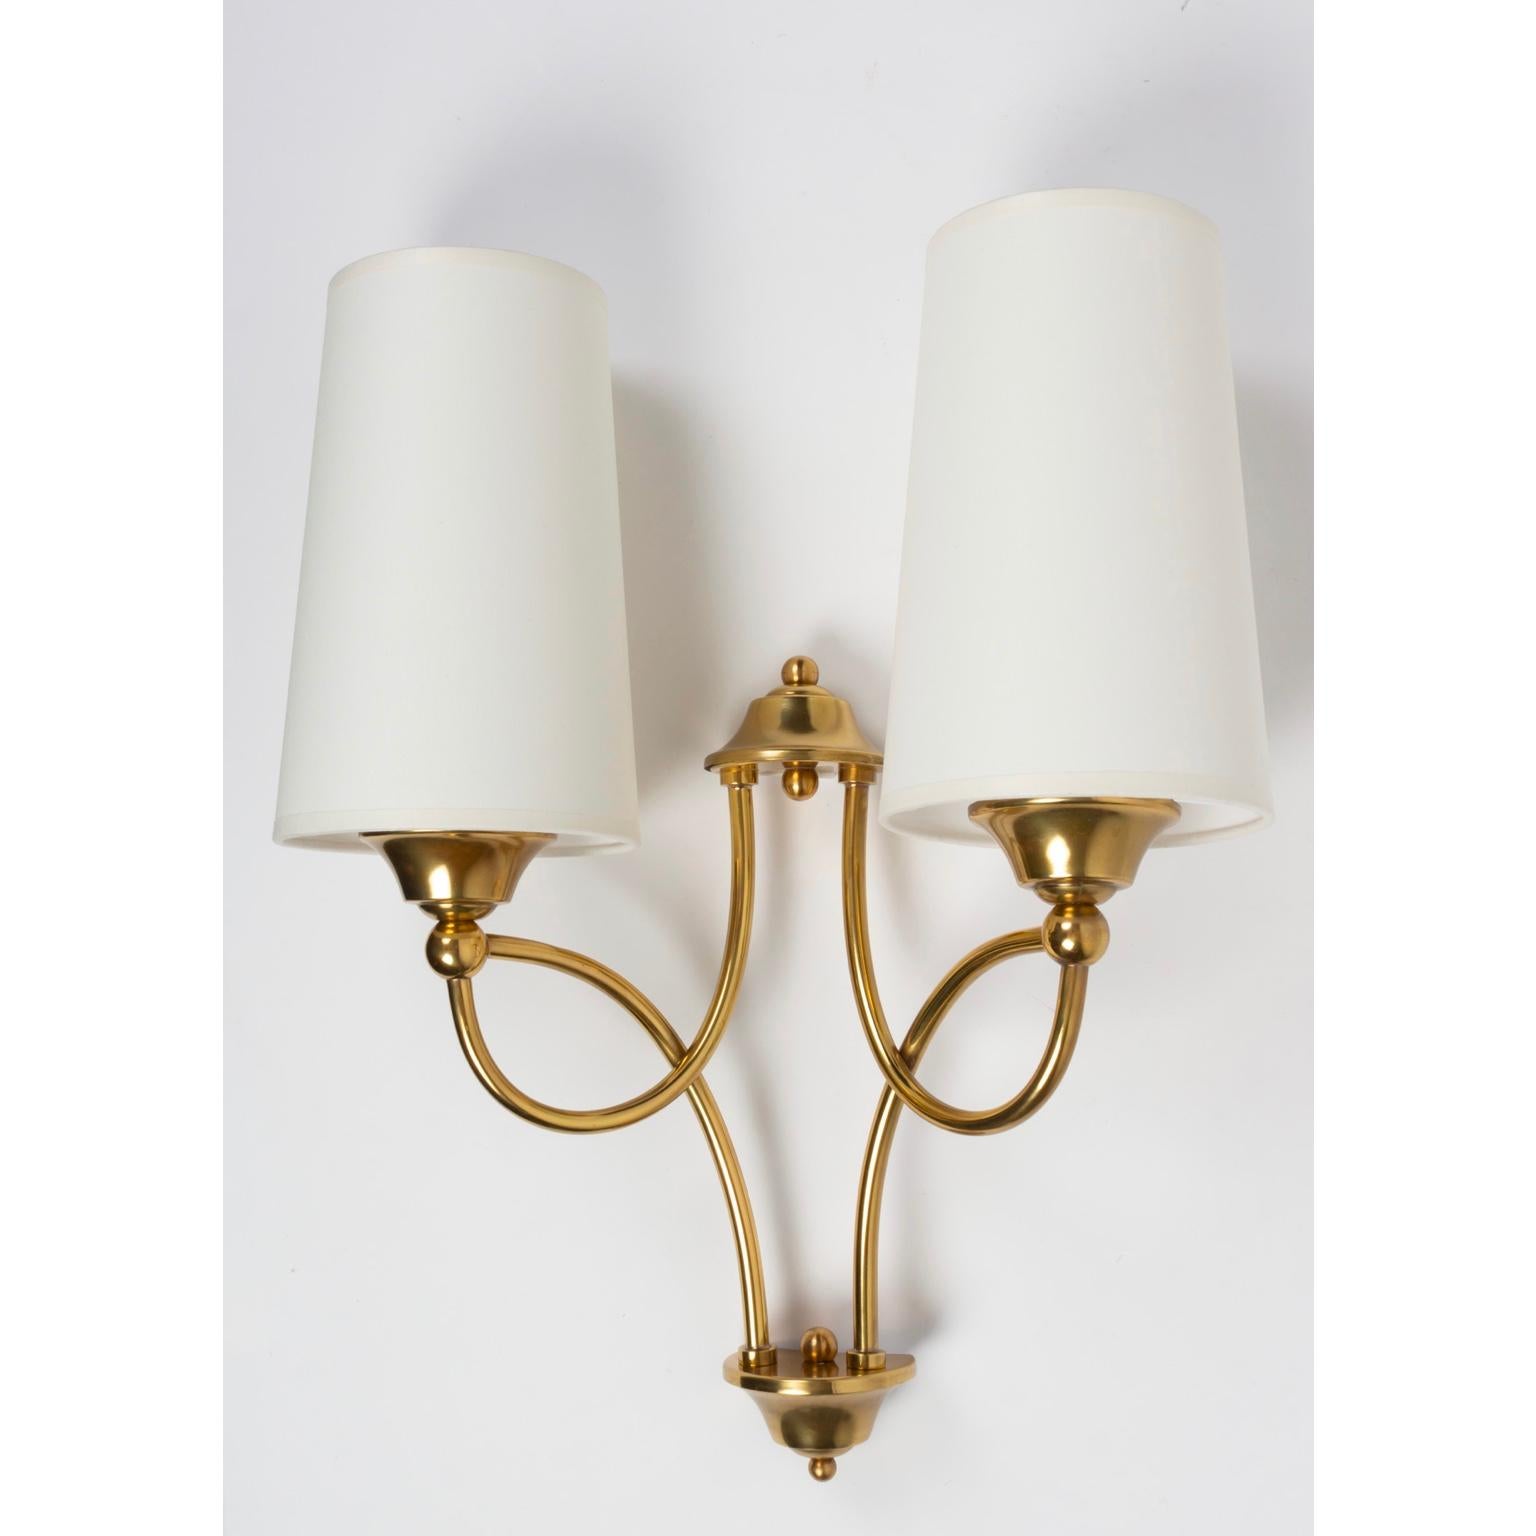 Charming pair of Maison Honoré sconces.
Made of brass the sconces feature two lighted arms.
Handmade off-white cotton lampshades.
  